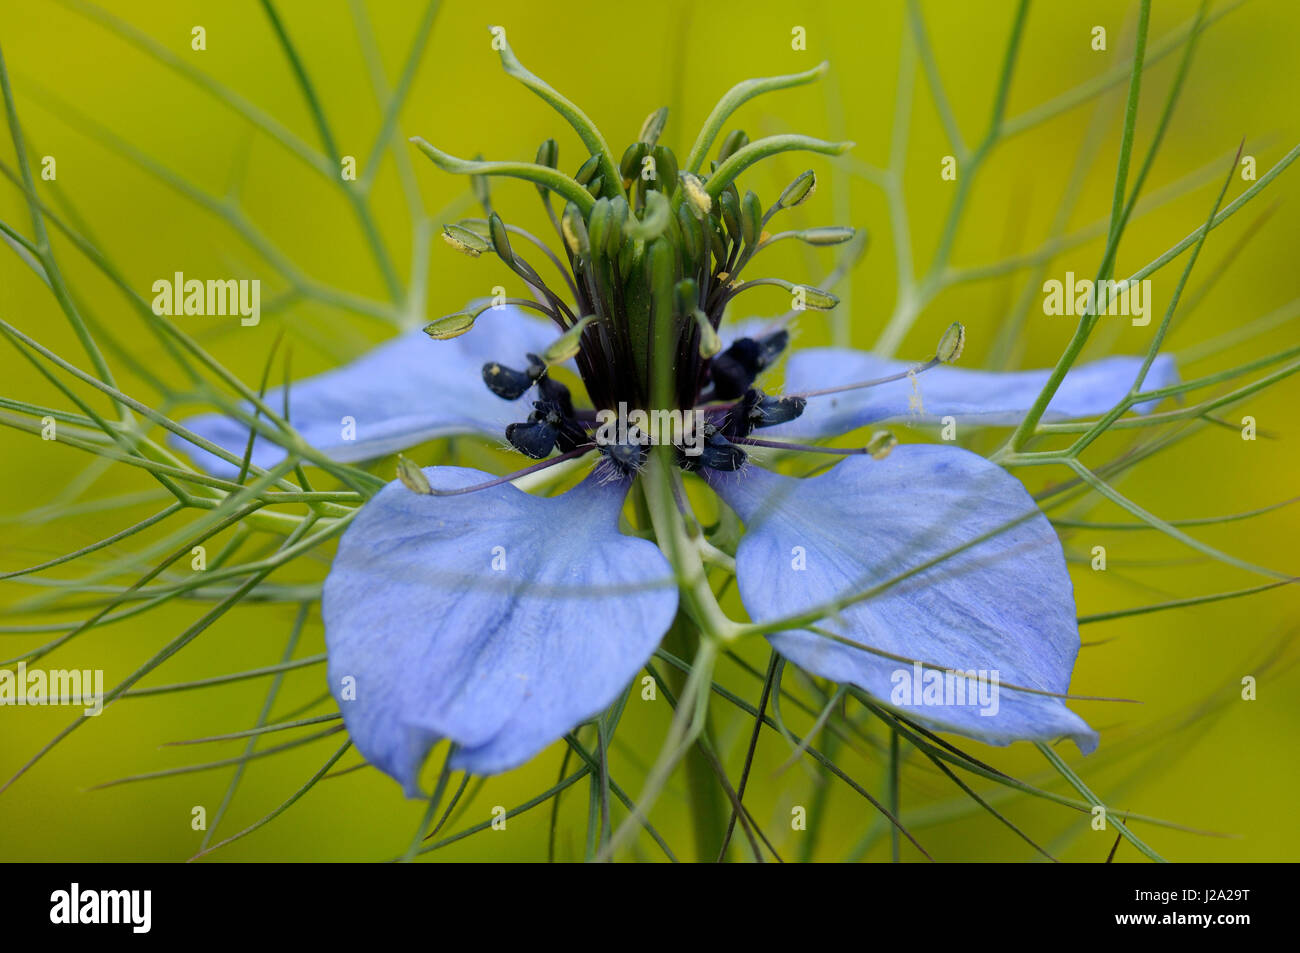 Love-in-a-mist flower in close-up Stock Photo